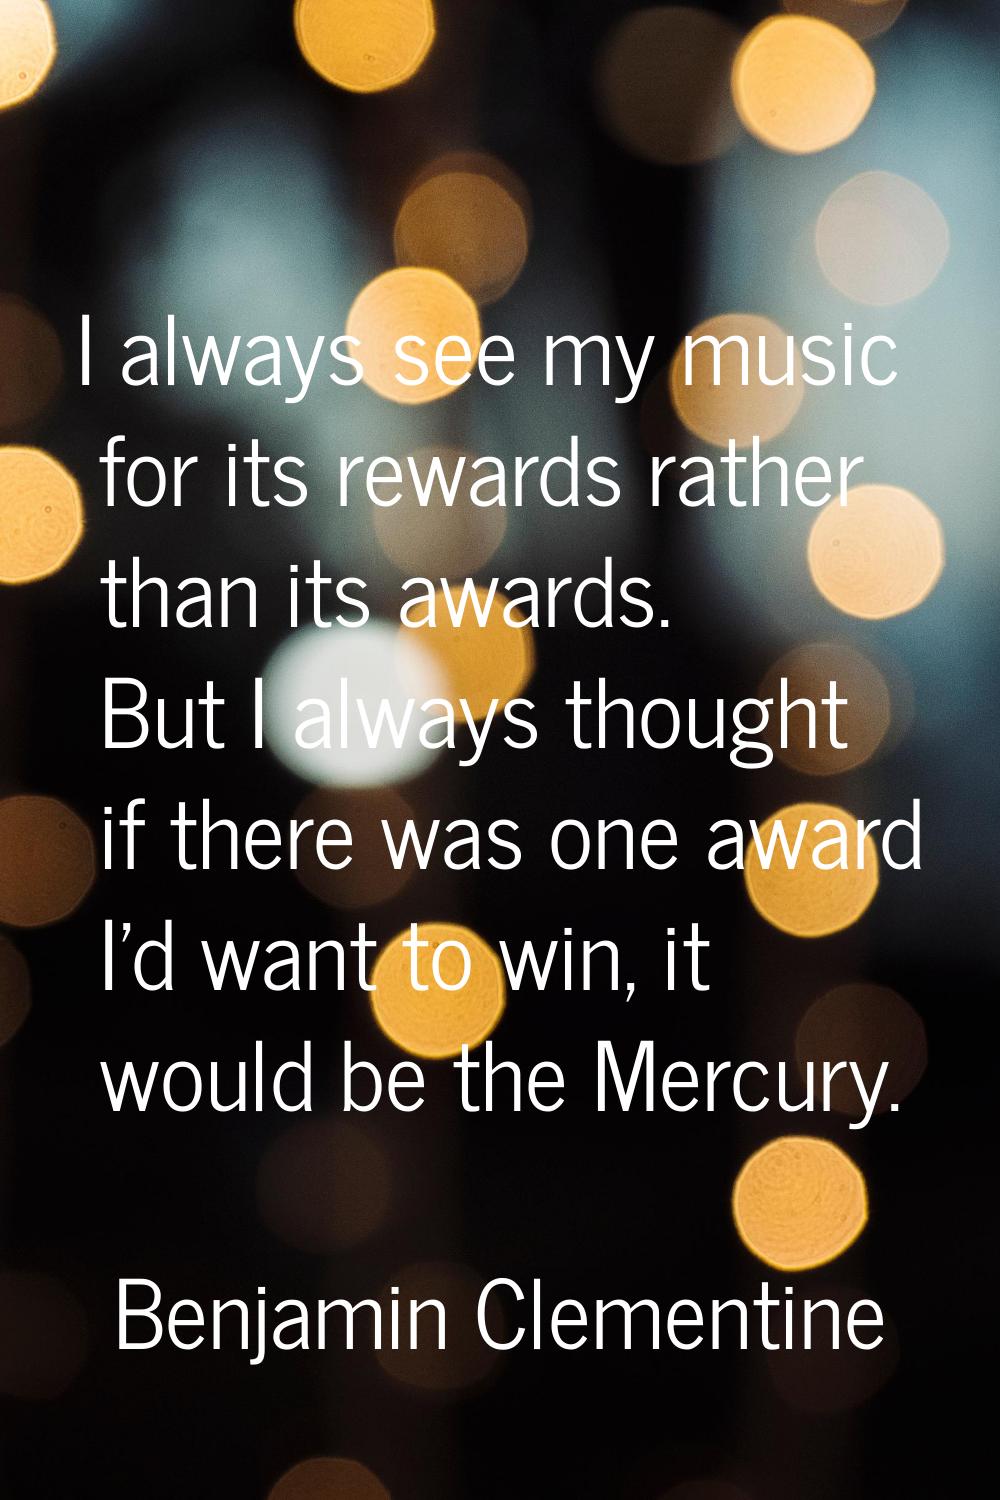 I always see my music for its rewards rather than its awards. But I always thought if there was one